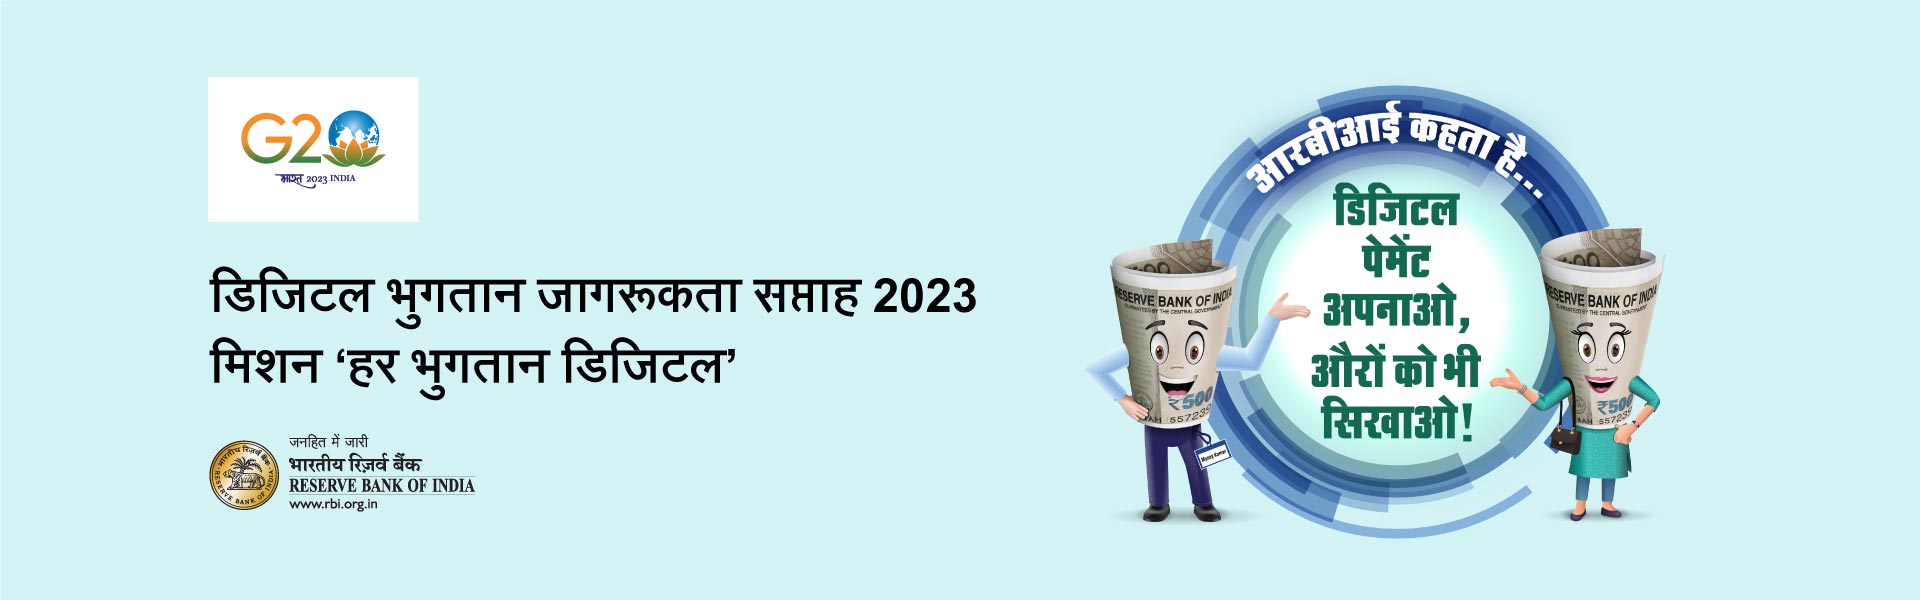 Digital Payments Awareness Week 2023 and Mission Har Payment Digital